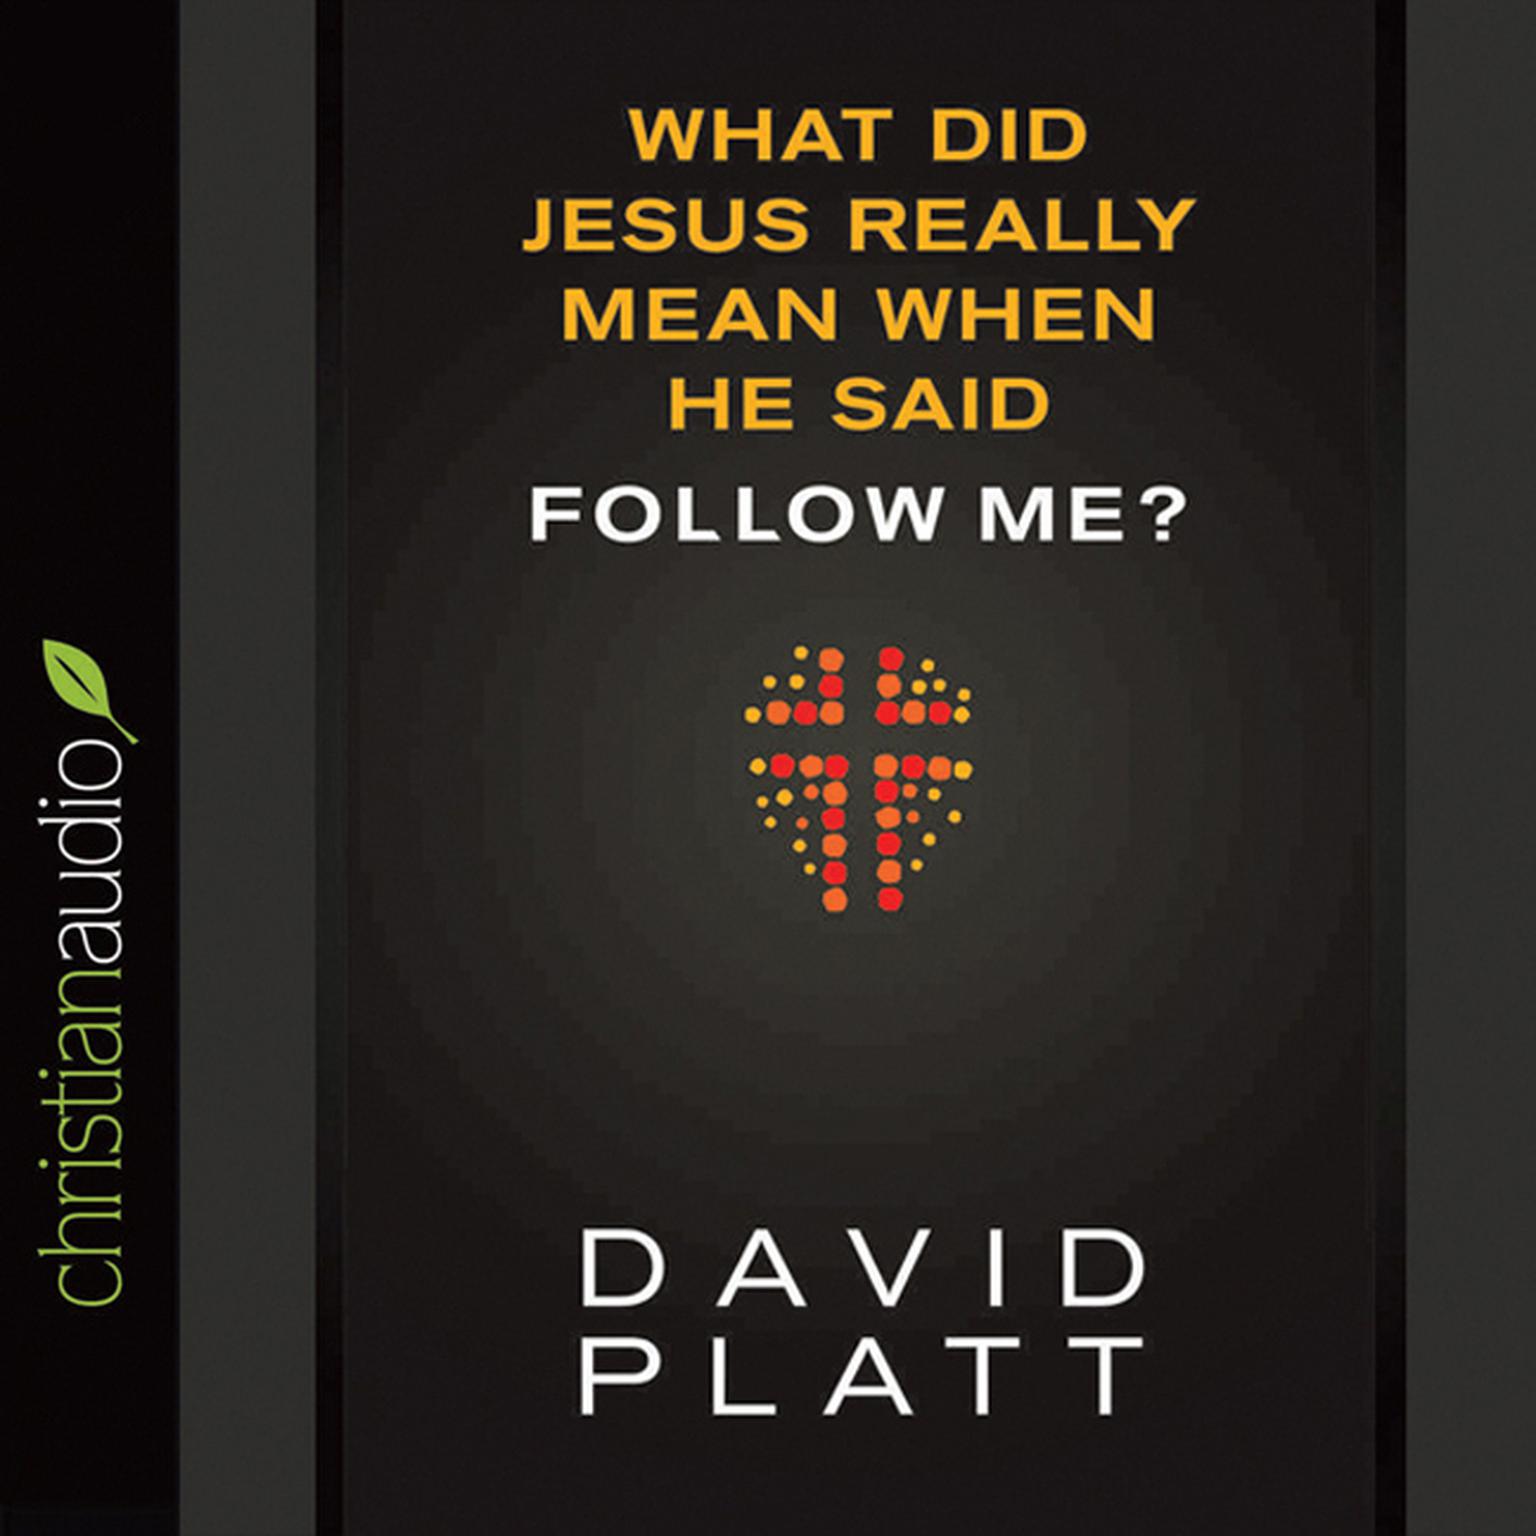 What Did Jesus Really Mean When He Said Follow Me? Audiobook, by David Platt